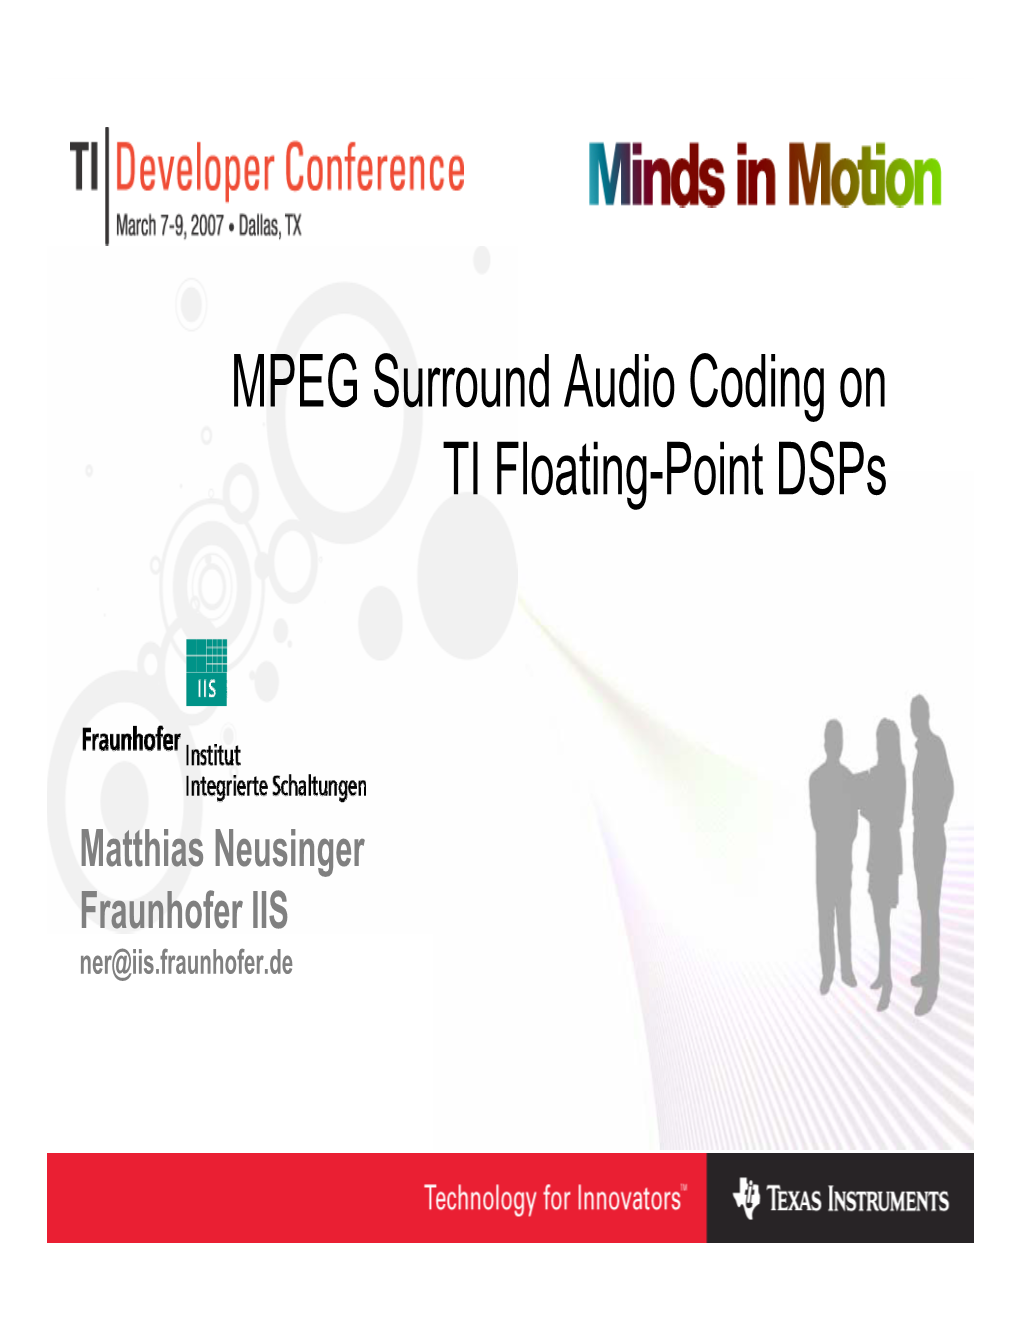 MPEG Surround Audio Coding on TI Floating-Point Dsps